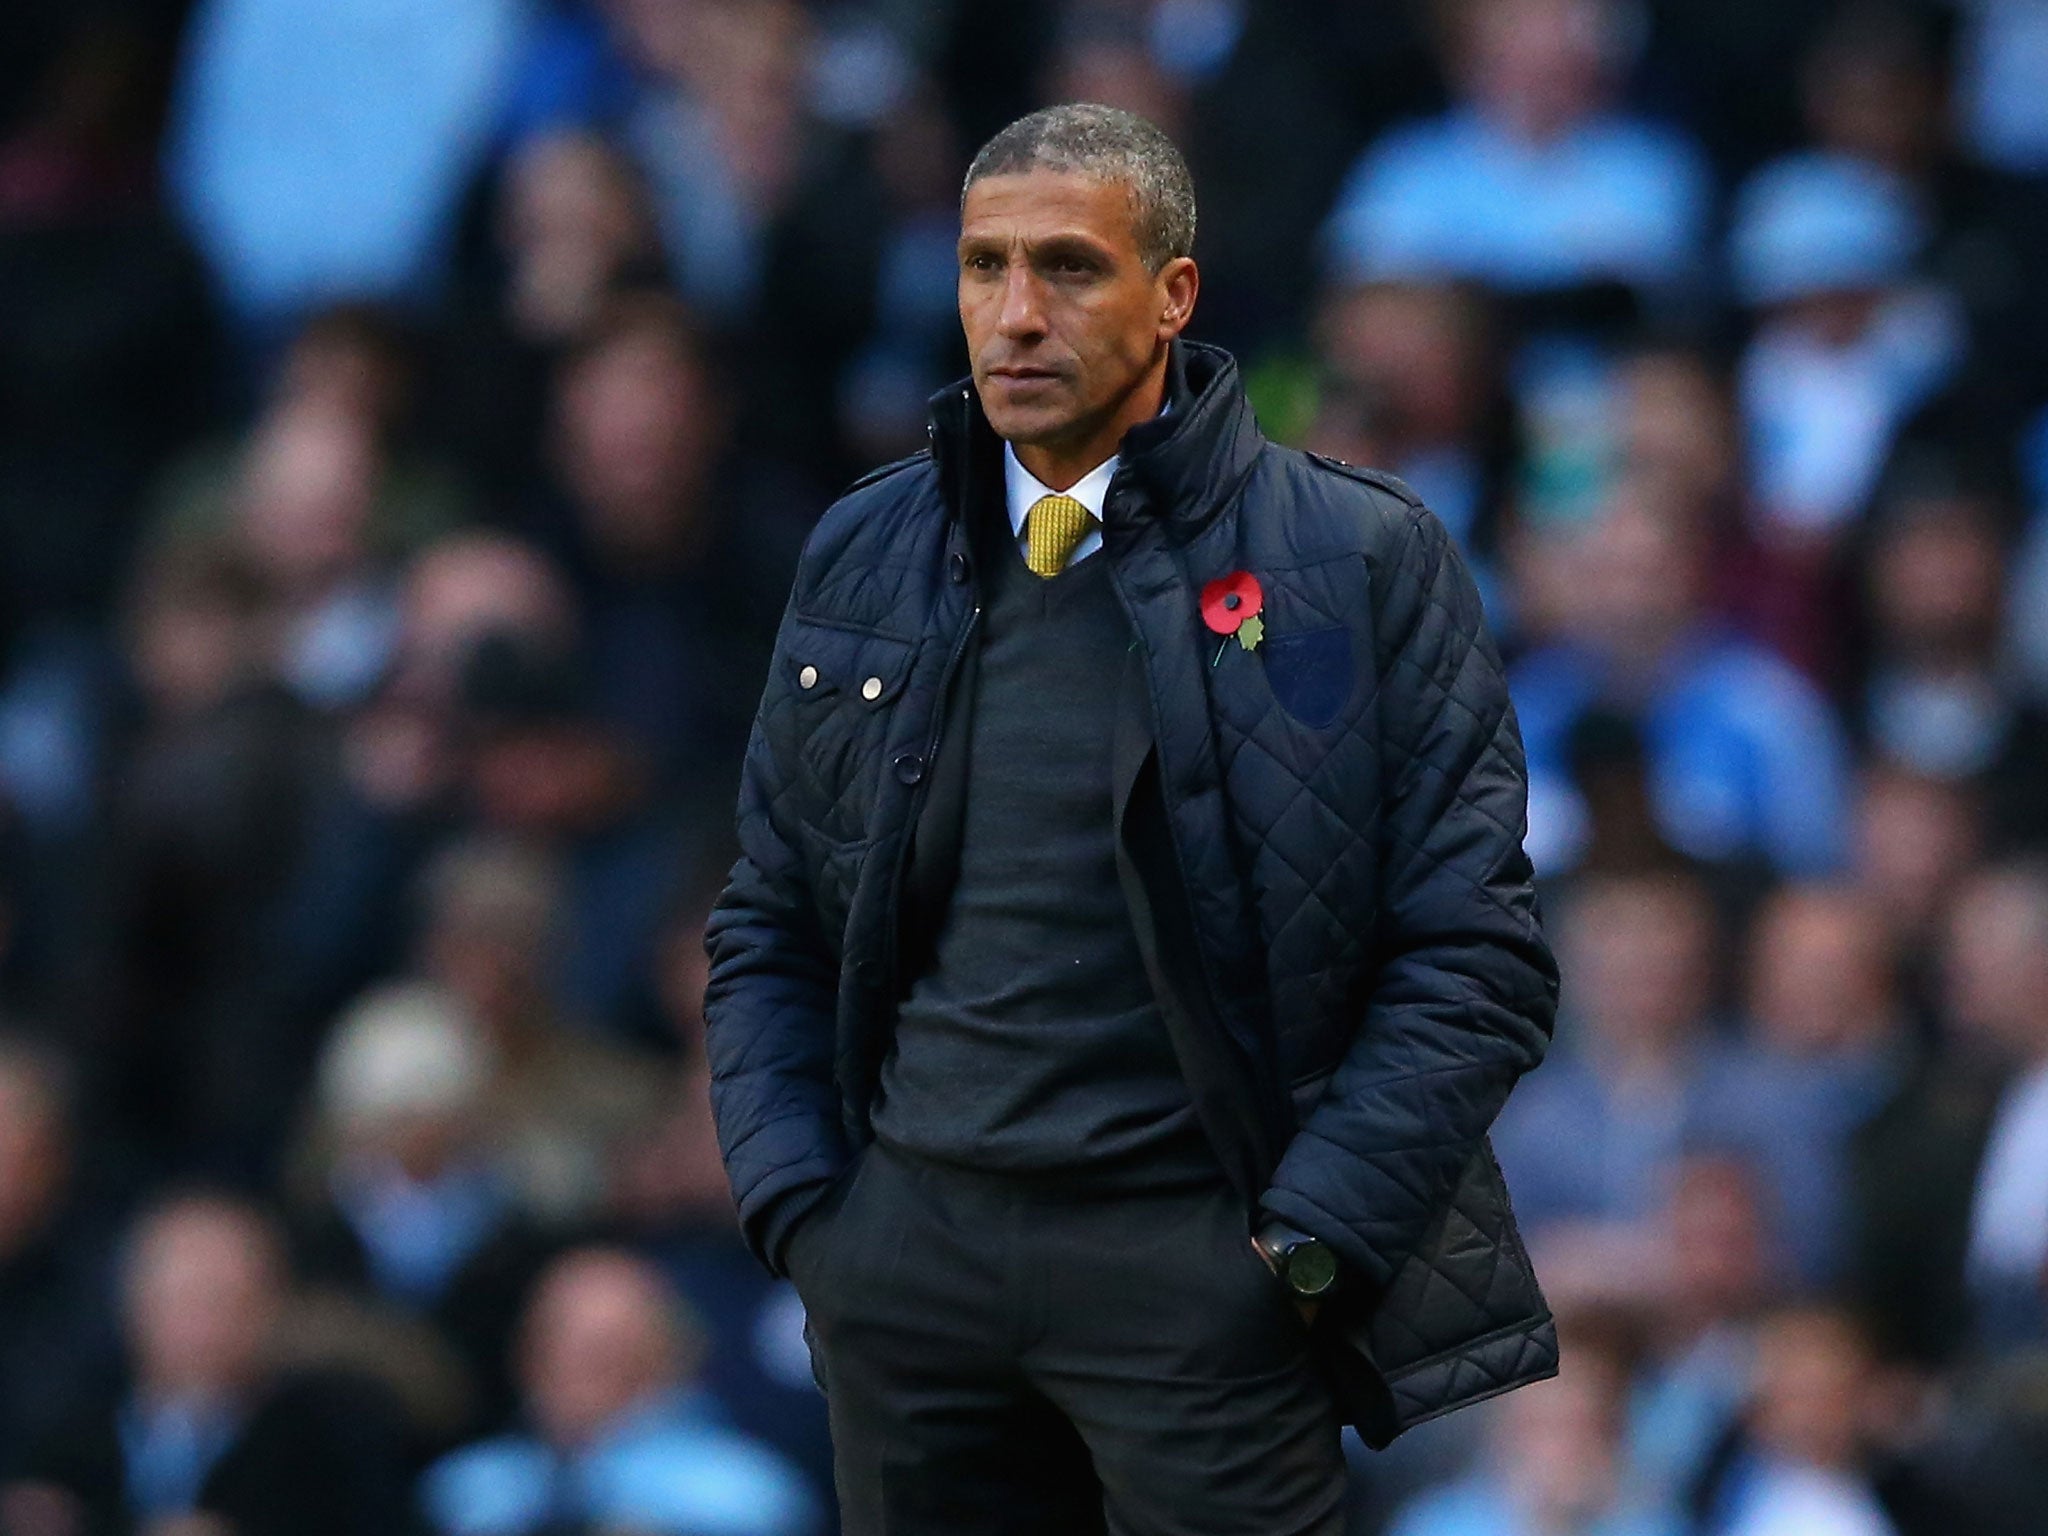 Chris Hughton cuts a lonely figure on the touchline during Norwich City's 7-0 defeat at Manchester City last weekend